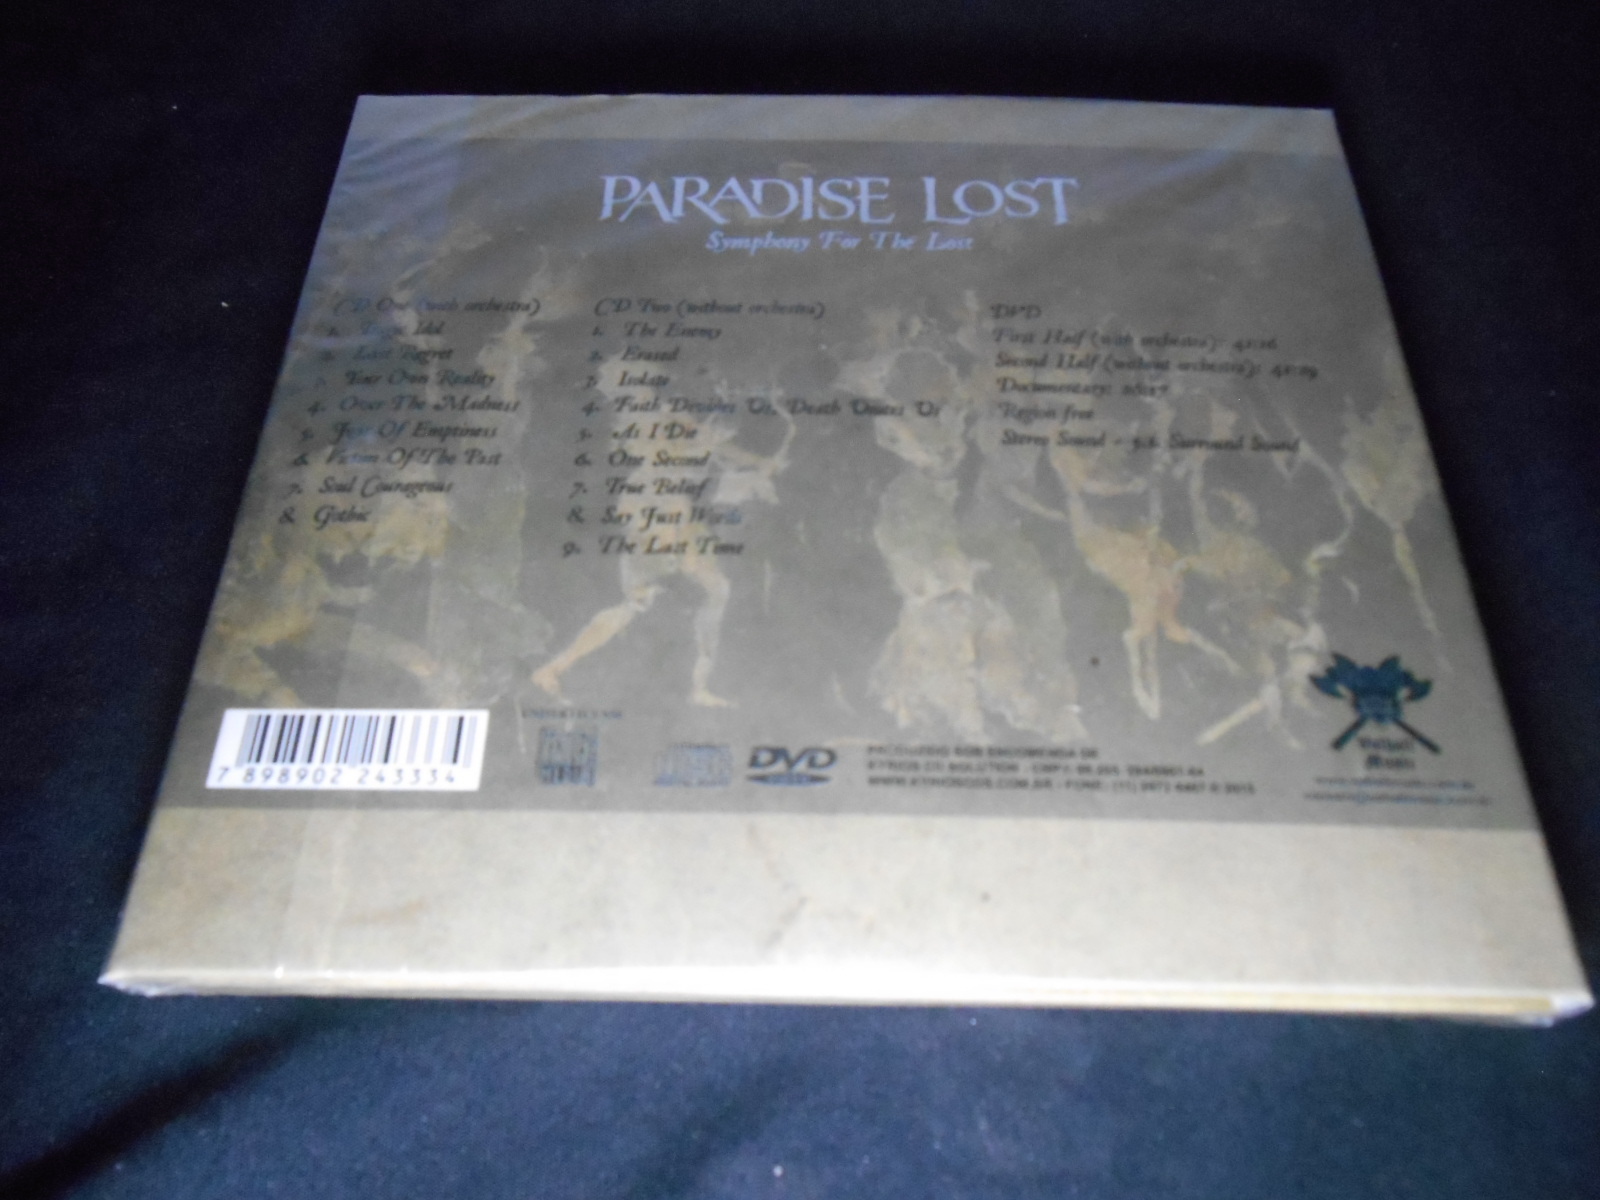 CD - Paradise Lost - Symphony For The Lost (Lacrado/2CD/DVD/Papersleeve)